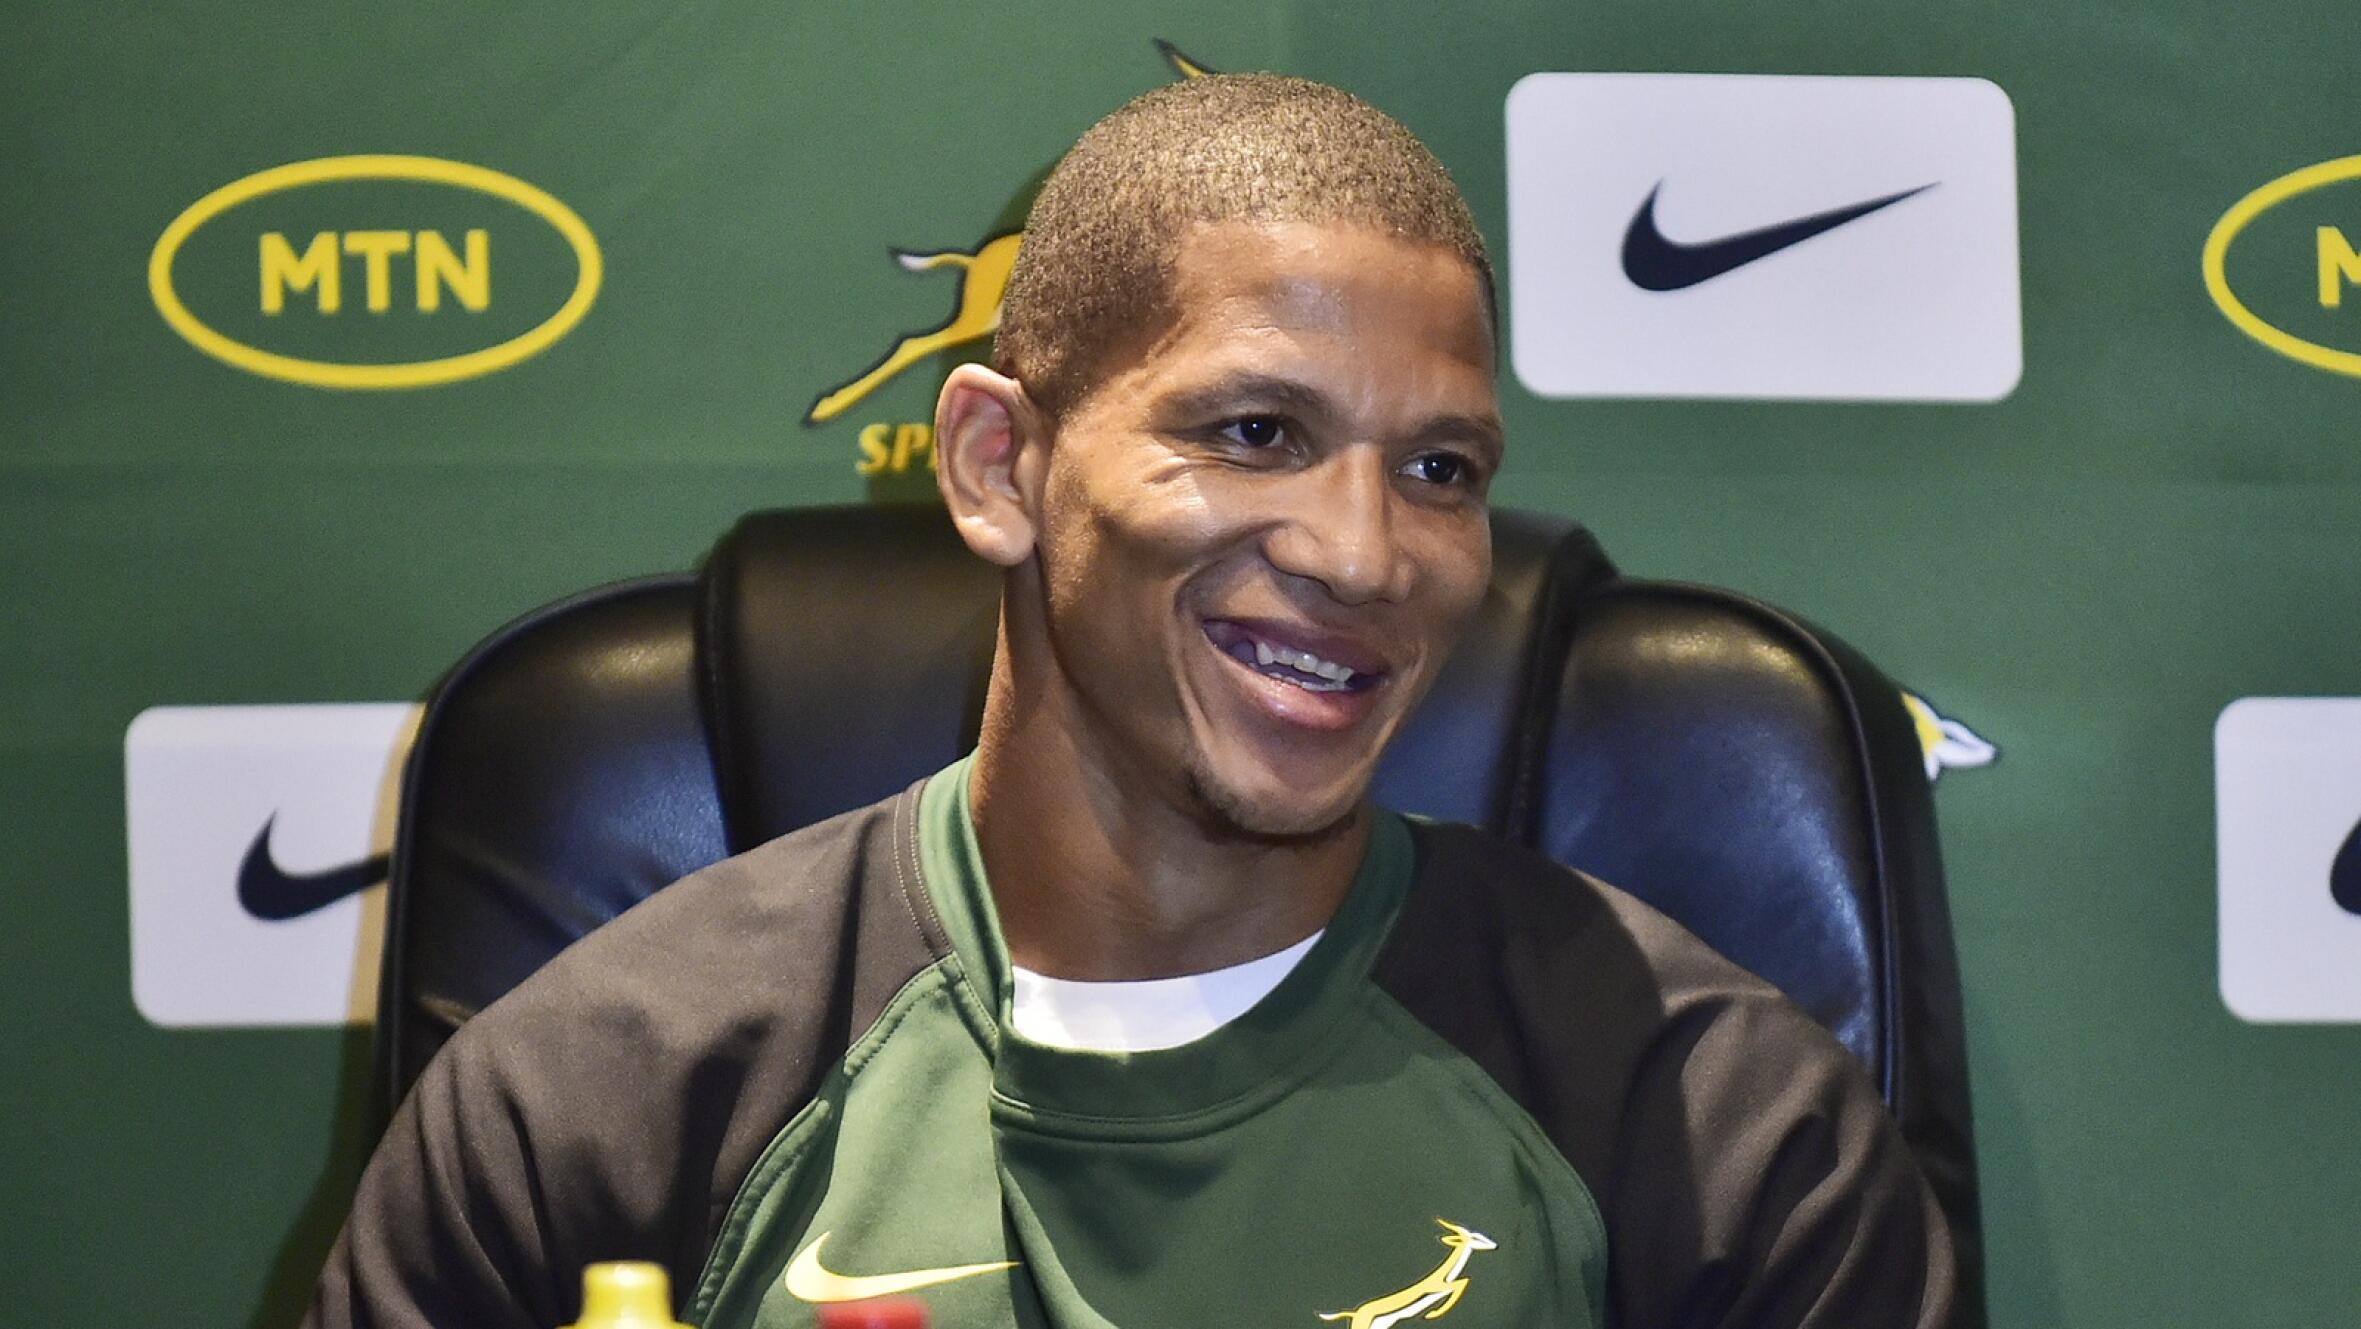 Springboks player Manie Libbok during a media conference held at Southern Sun